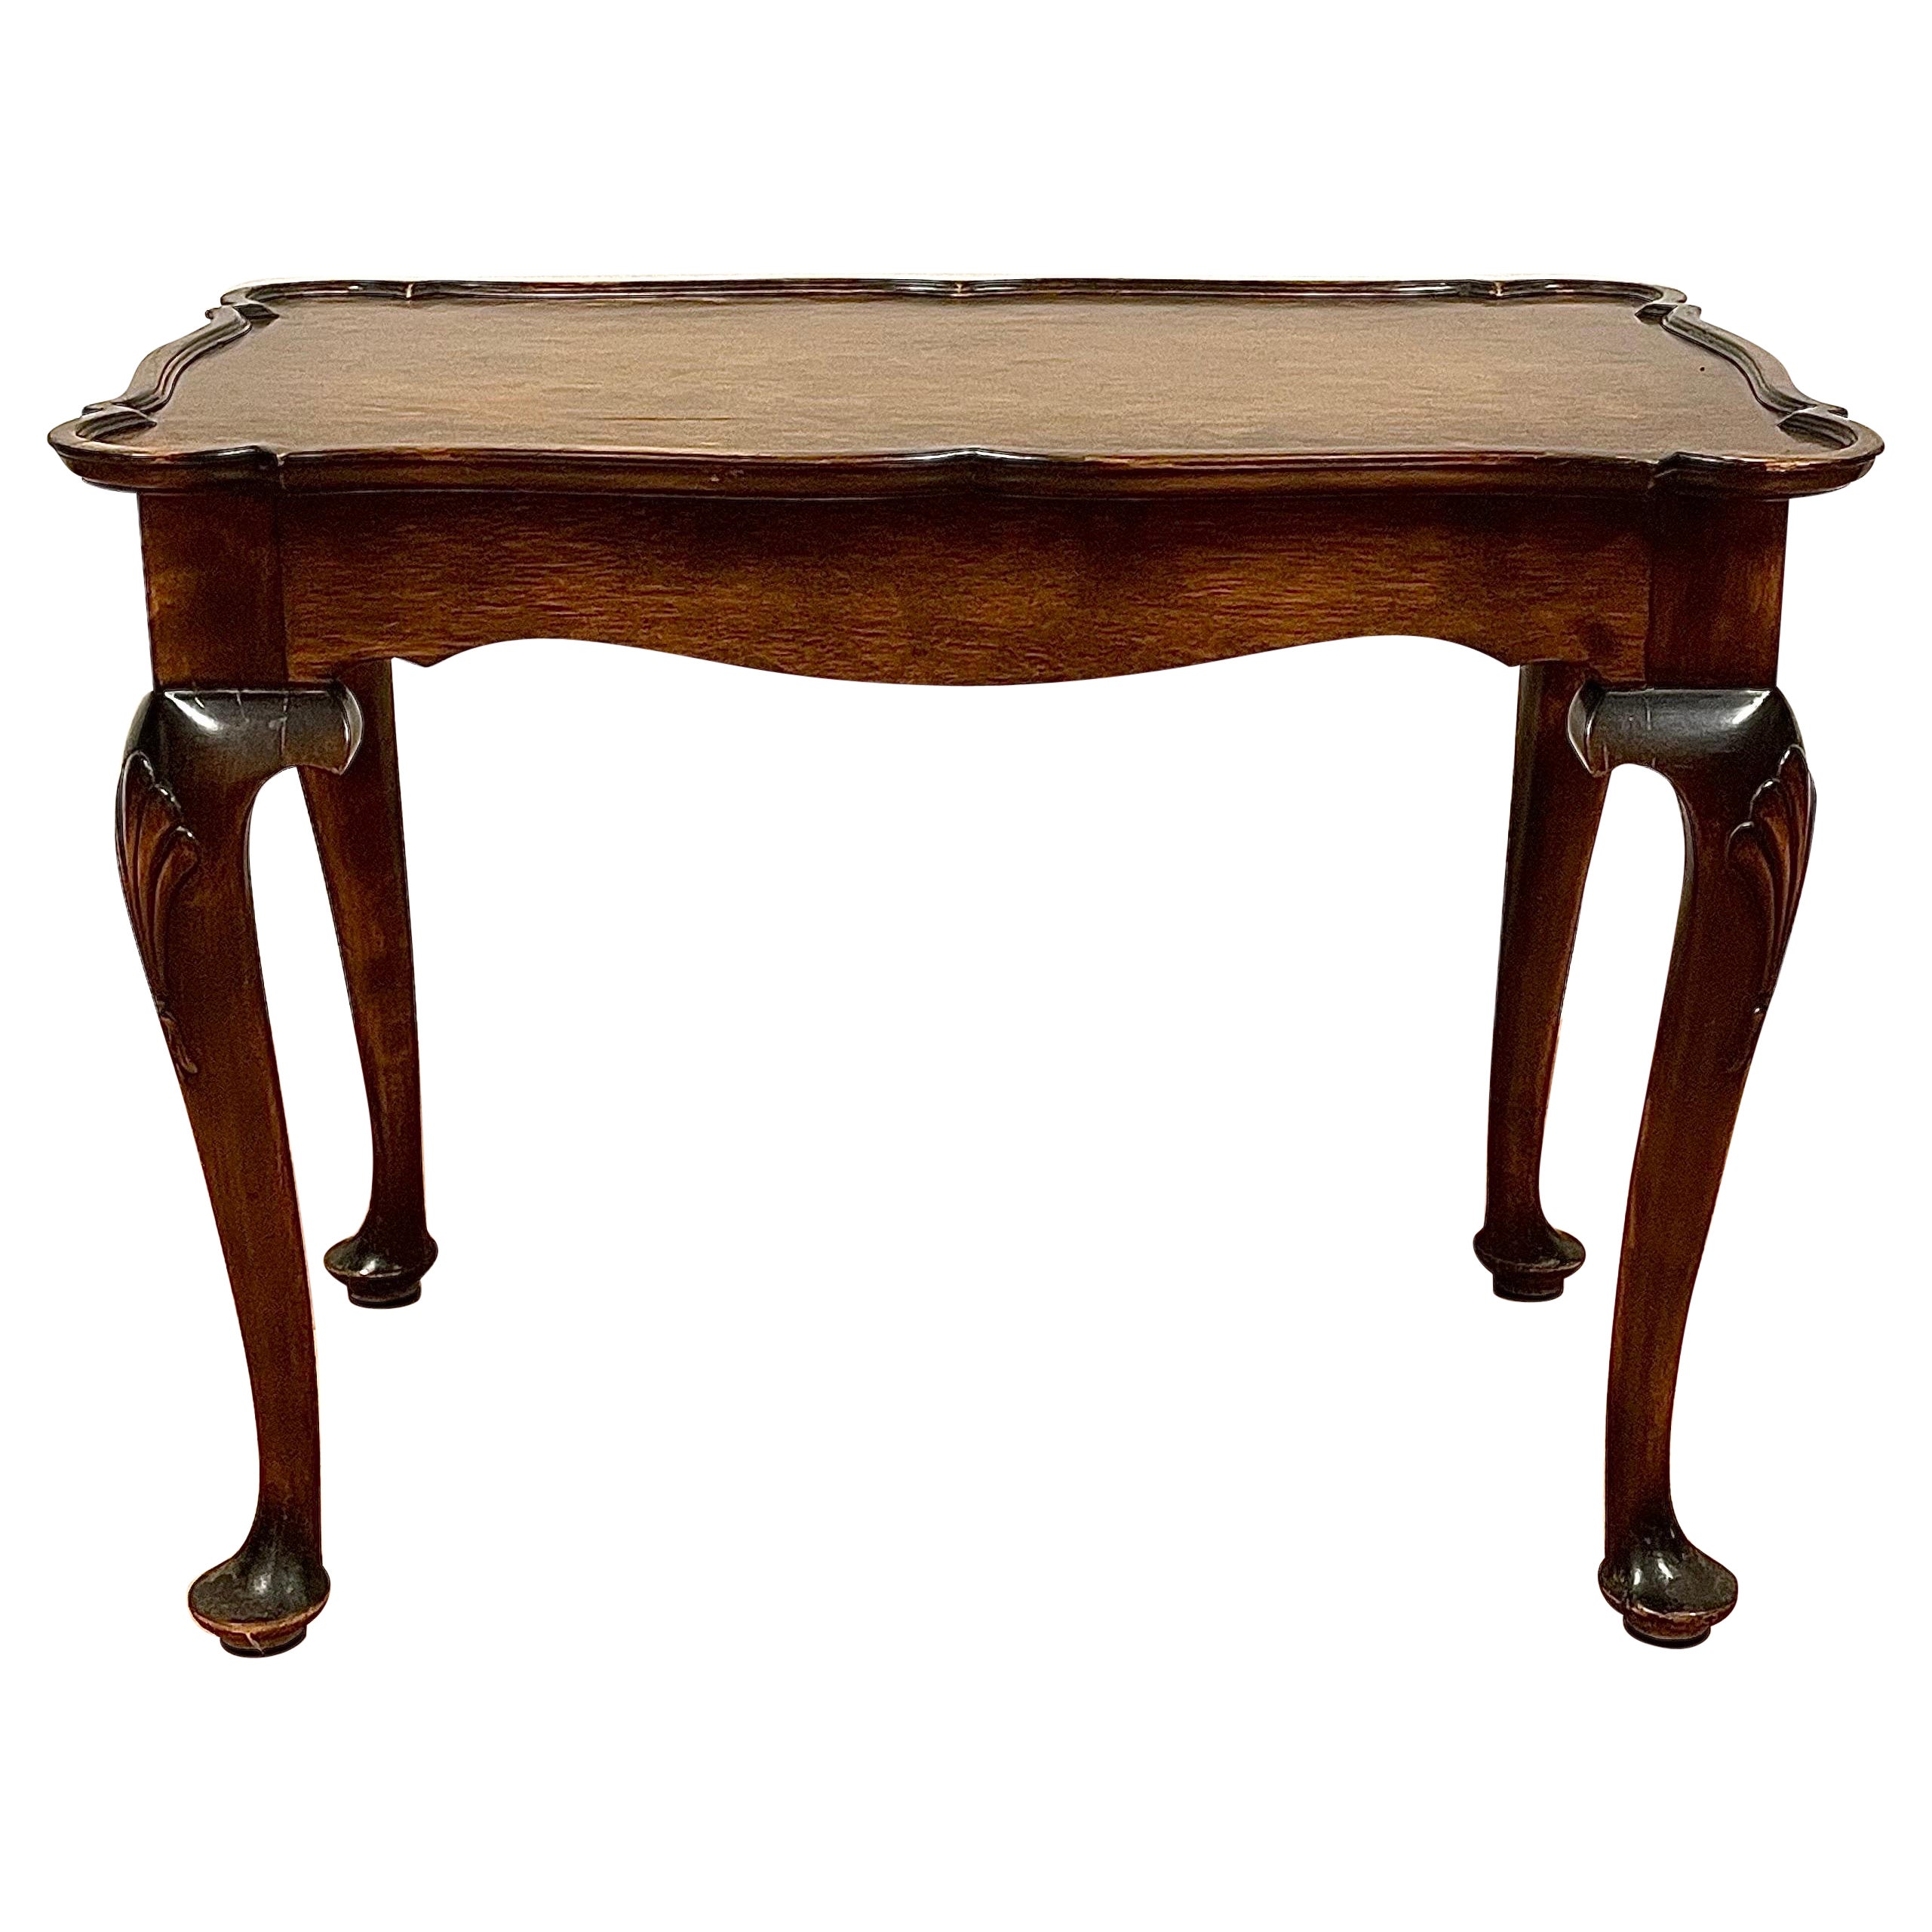 Swedish Tray Table in Stained Birch Manufactured 13/3 1929 by Nordiska Kompaniet